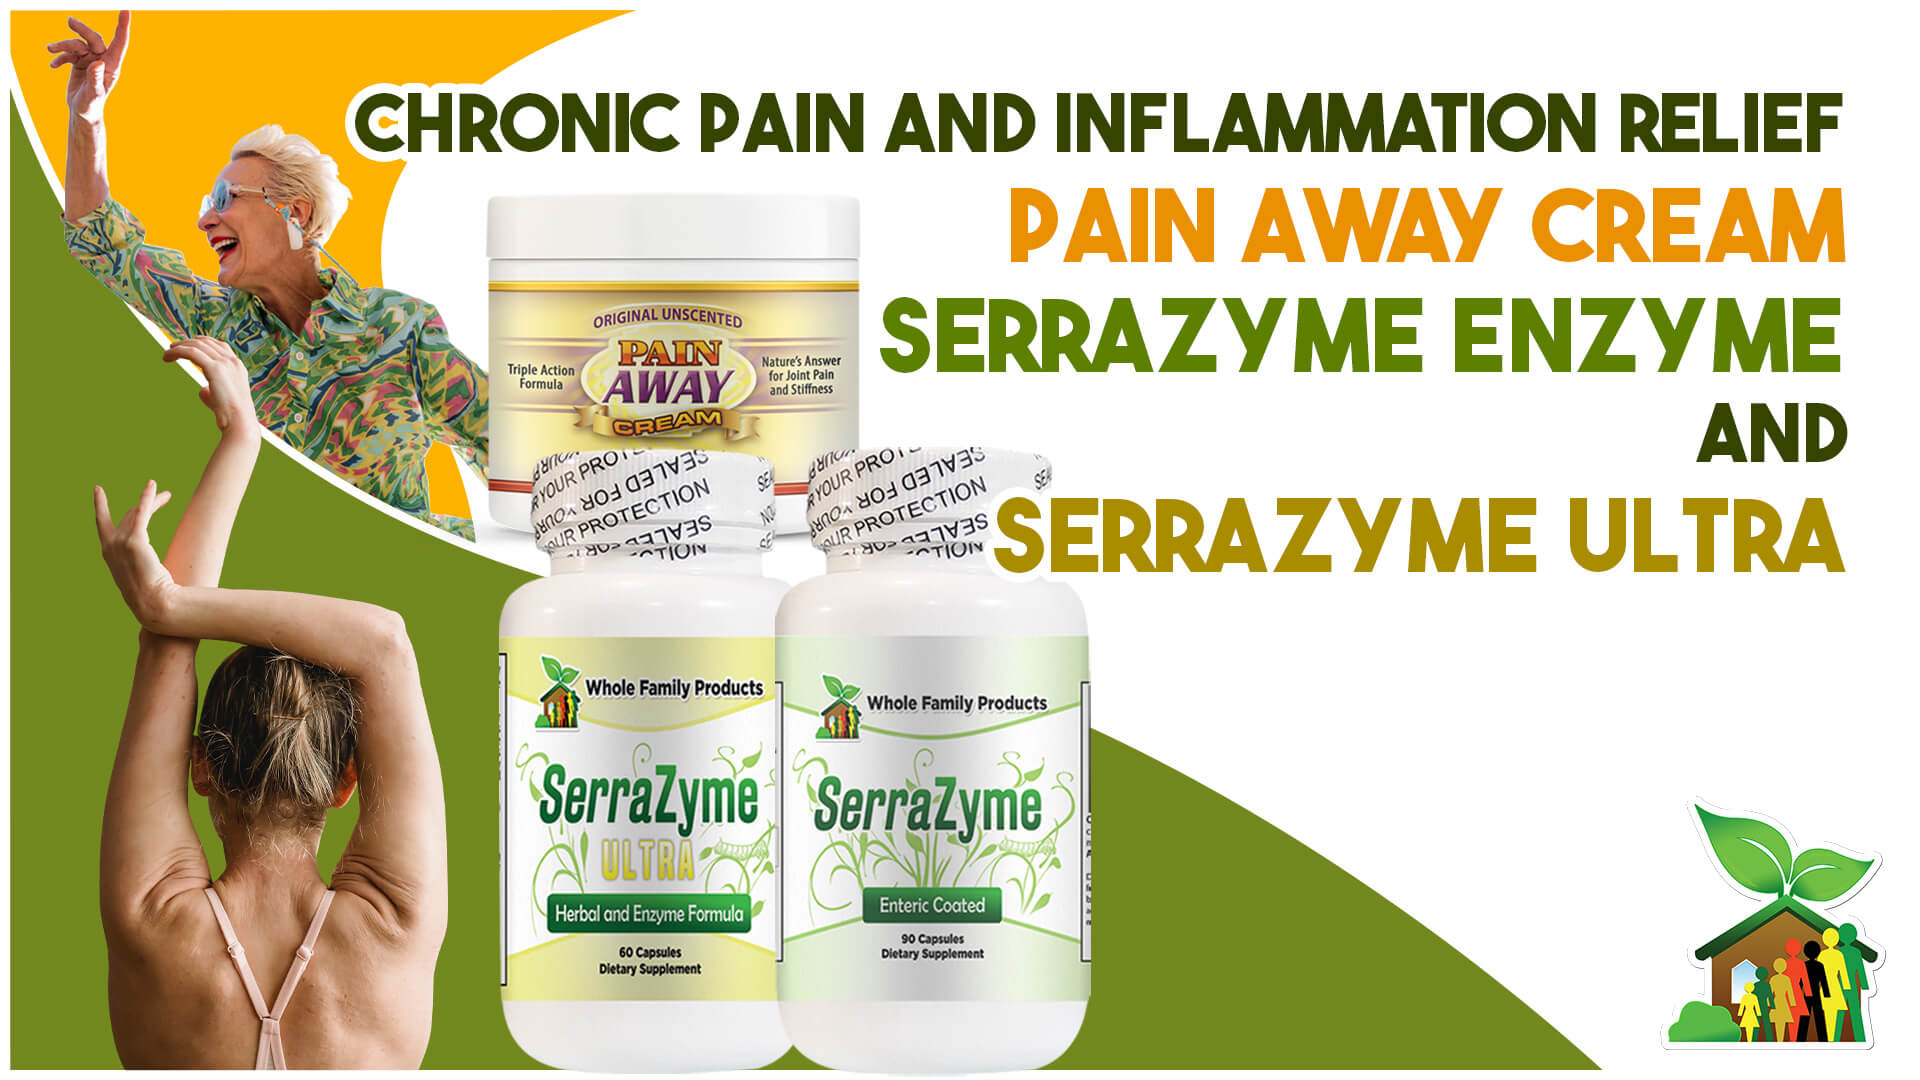 Best Chronic Pain and Inflammation Relief: Pain Away Cream, SerraZyme Enzyme and SerraZyme Ultra